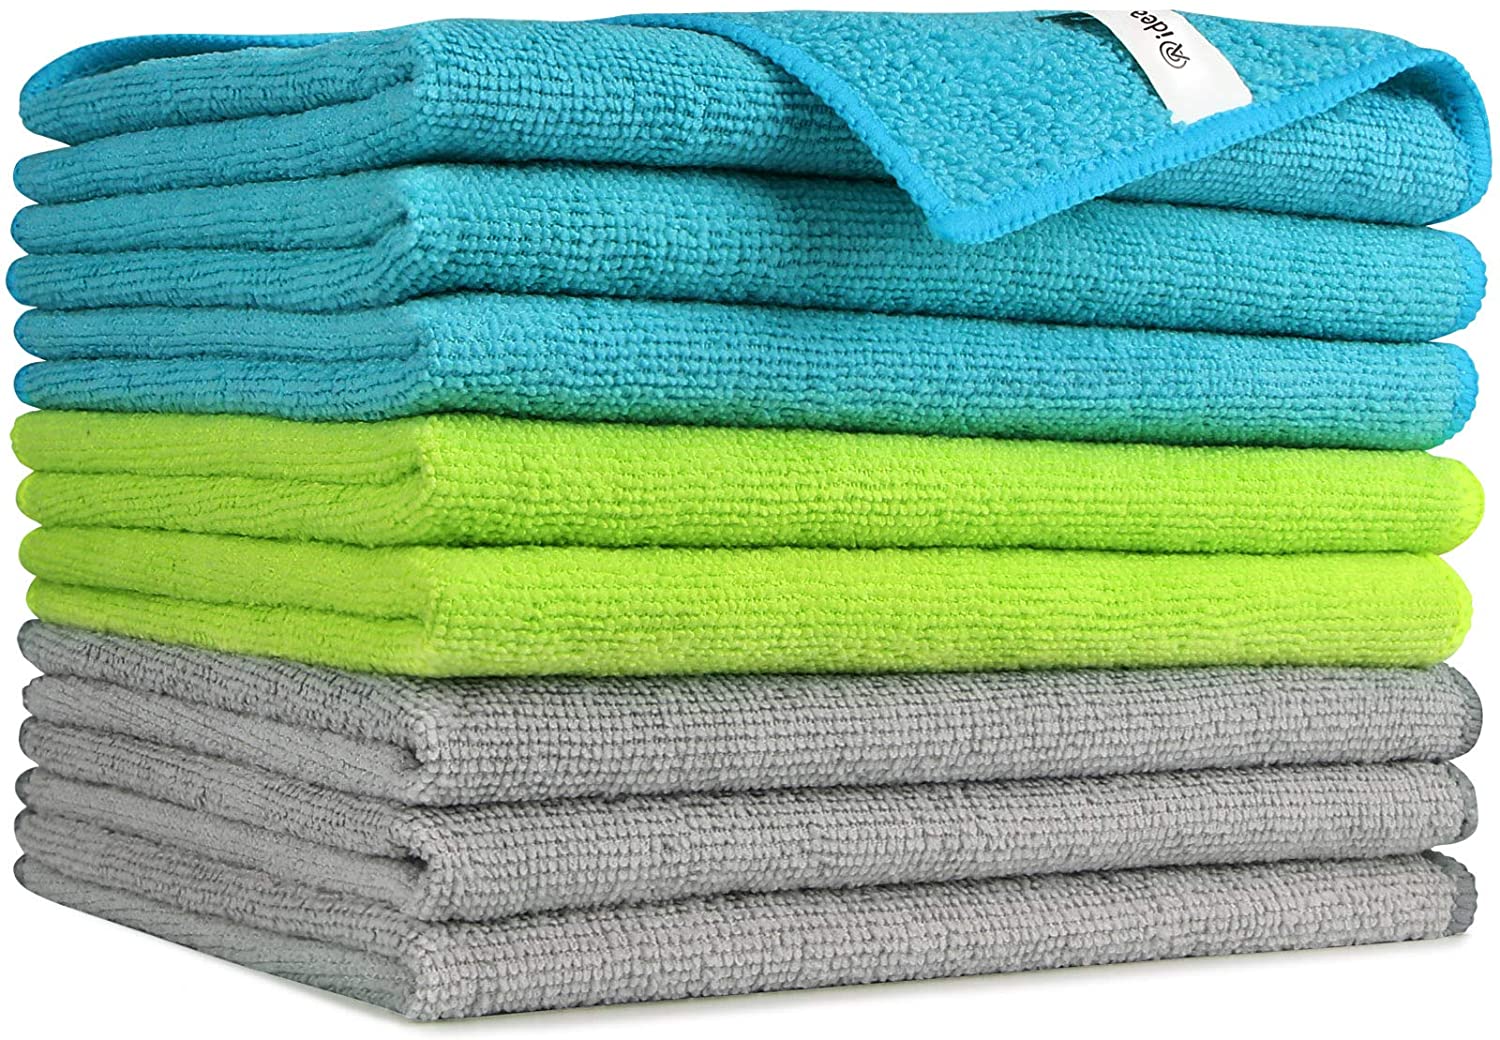 AIDEA Microfiber Cleaning Cloths-8PK, Softer Highly Absorbent